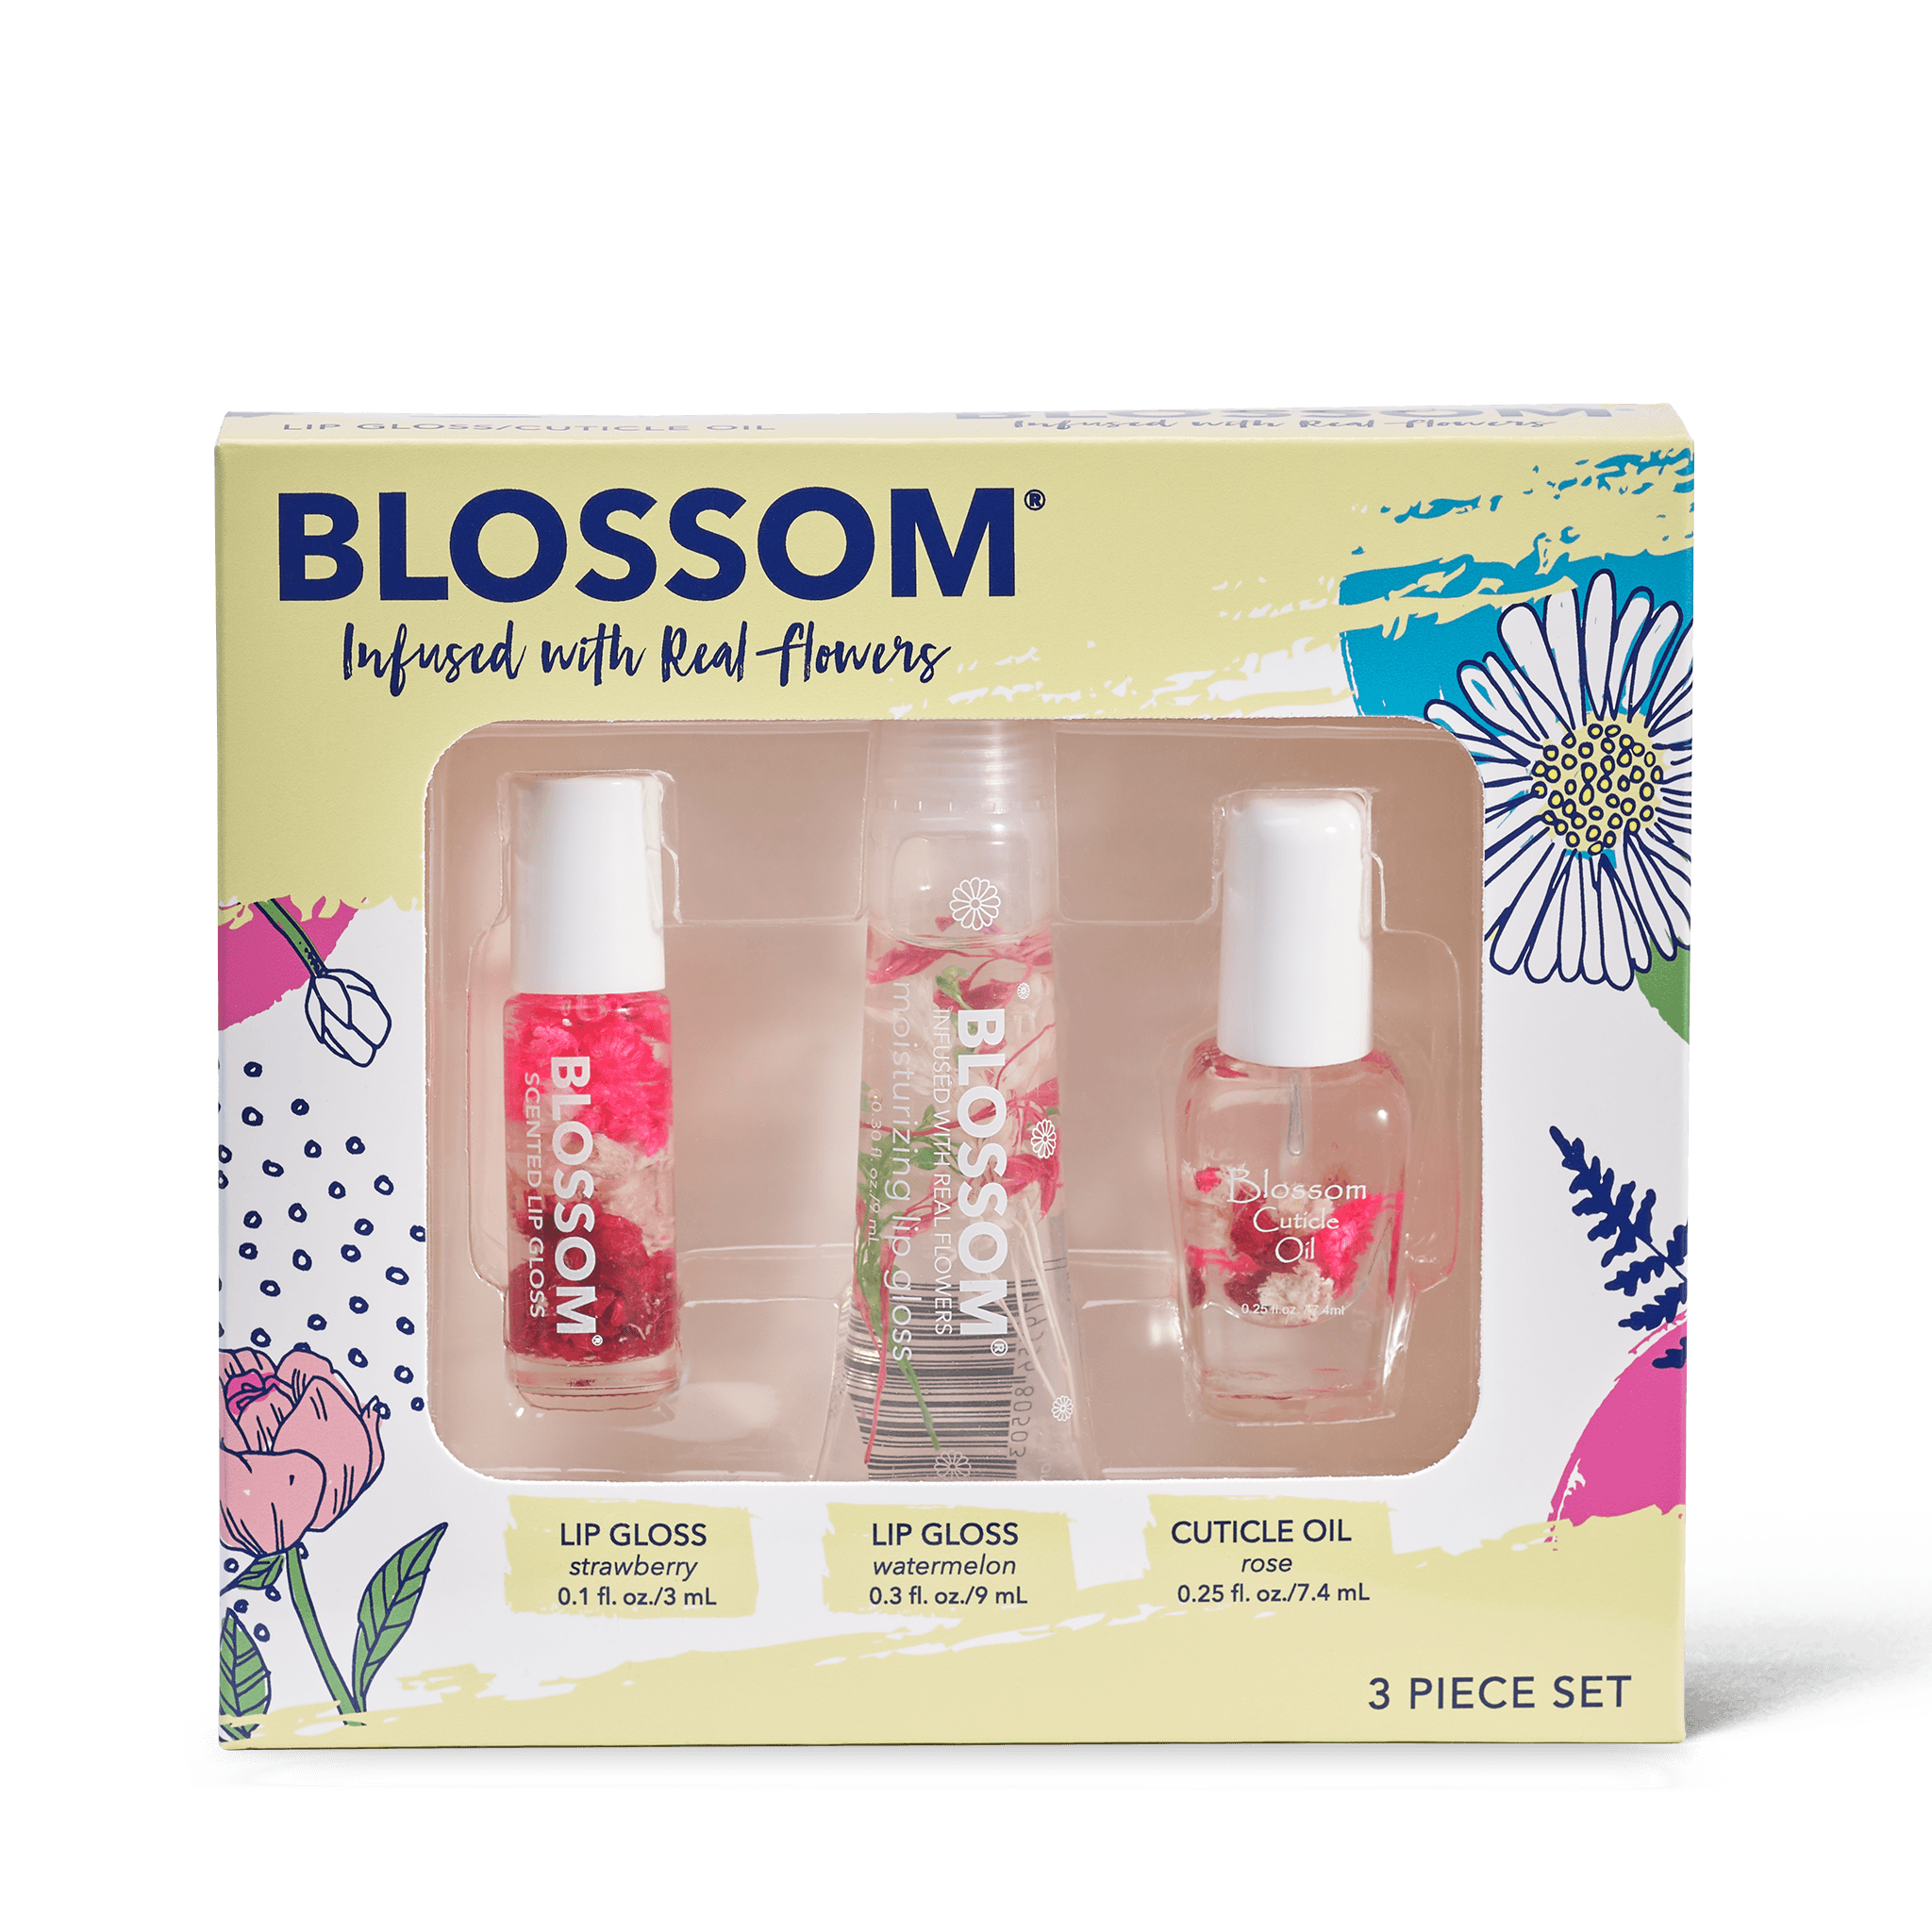 Blossom Roll on Rollerball Perfume Oil with Natural Ingredients + Essential  Oils, Infused with Real Flowers, Made in USA, 0.3 fl oz./9ml, 3 pack Mini